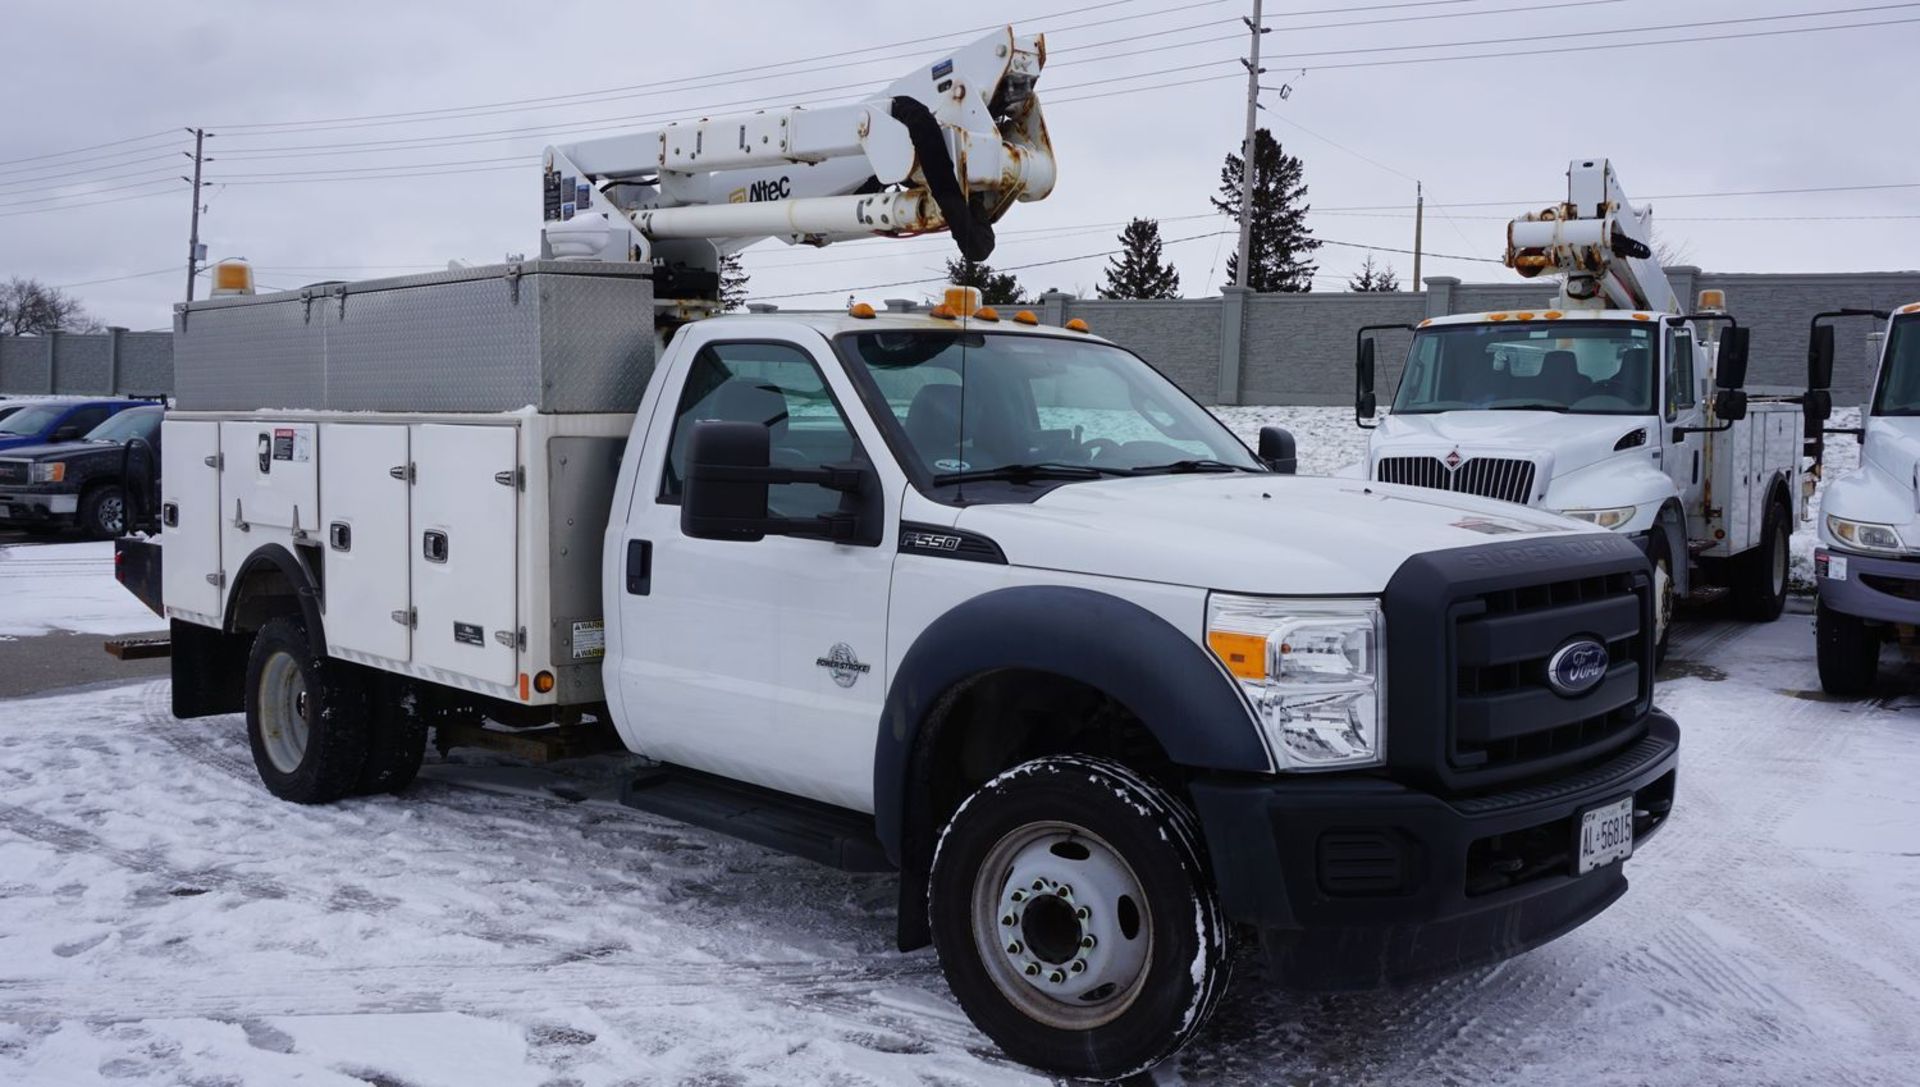 2015 ALTEC AT37G ARTICULATING TELESCOPIC BOOM & BUCKET MOUNTED ON 2015 FORD F550XL SUPER DUTY TRUCK - Image 4 of 18